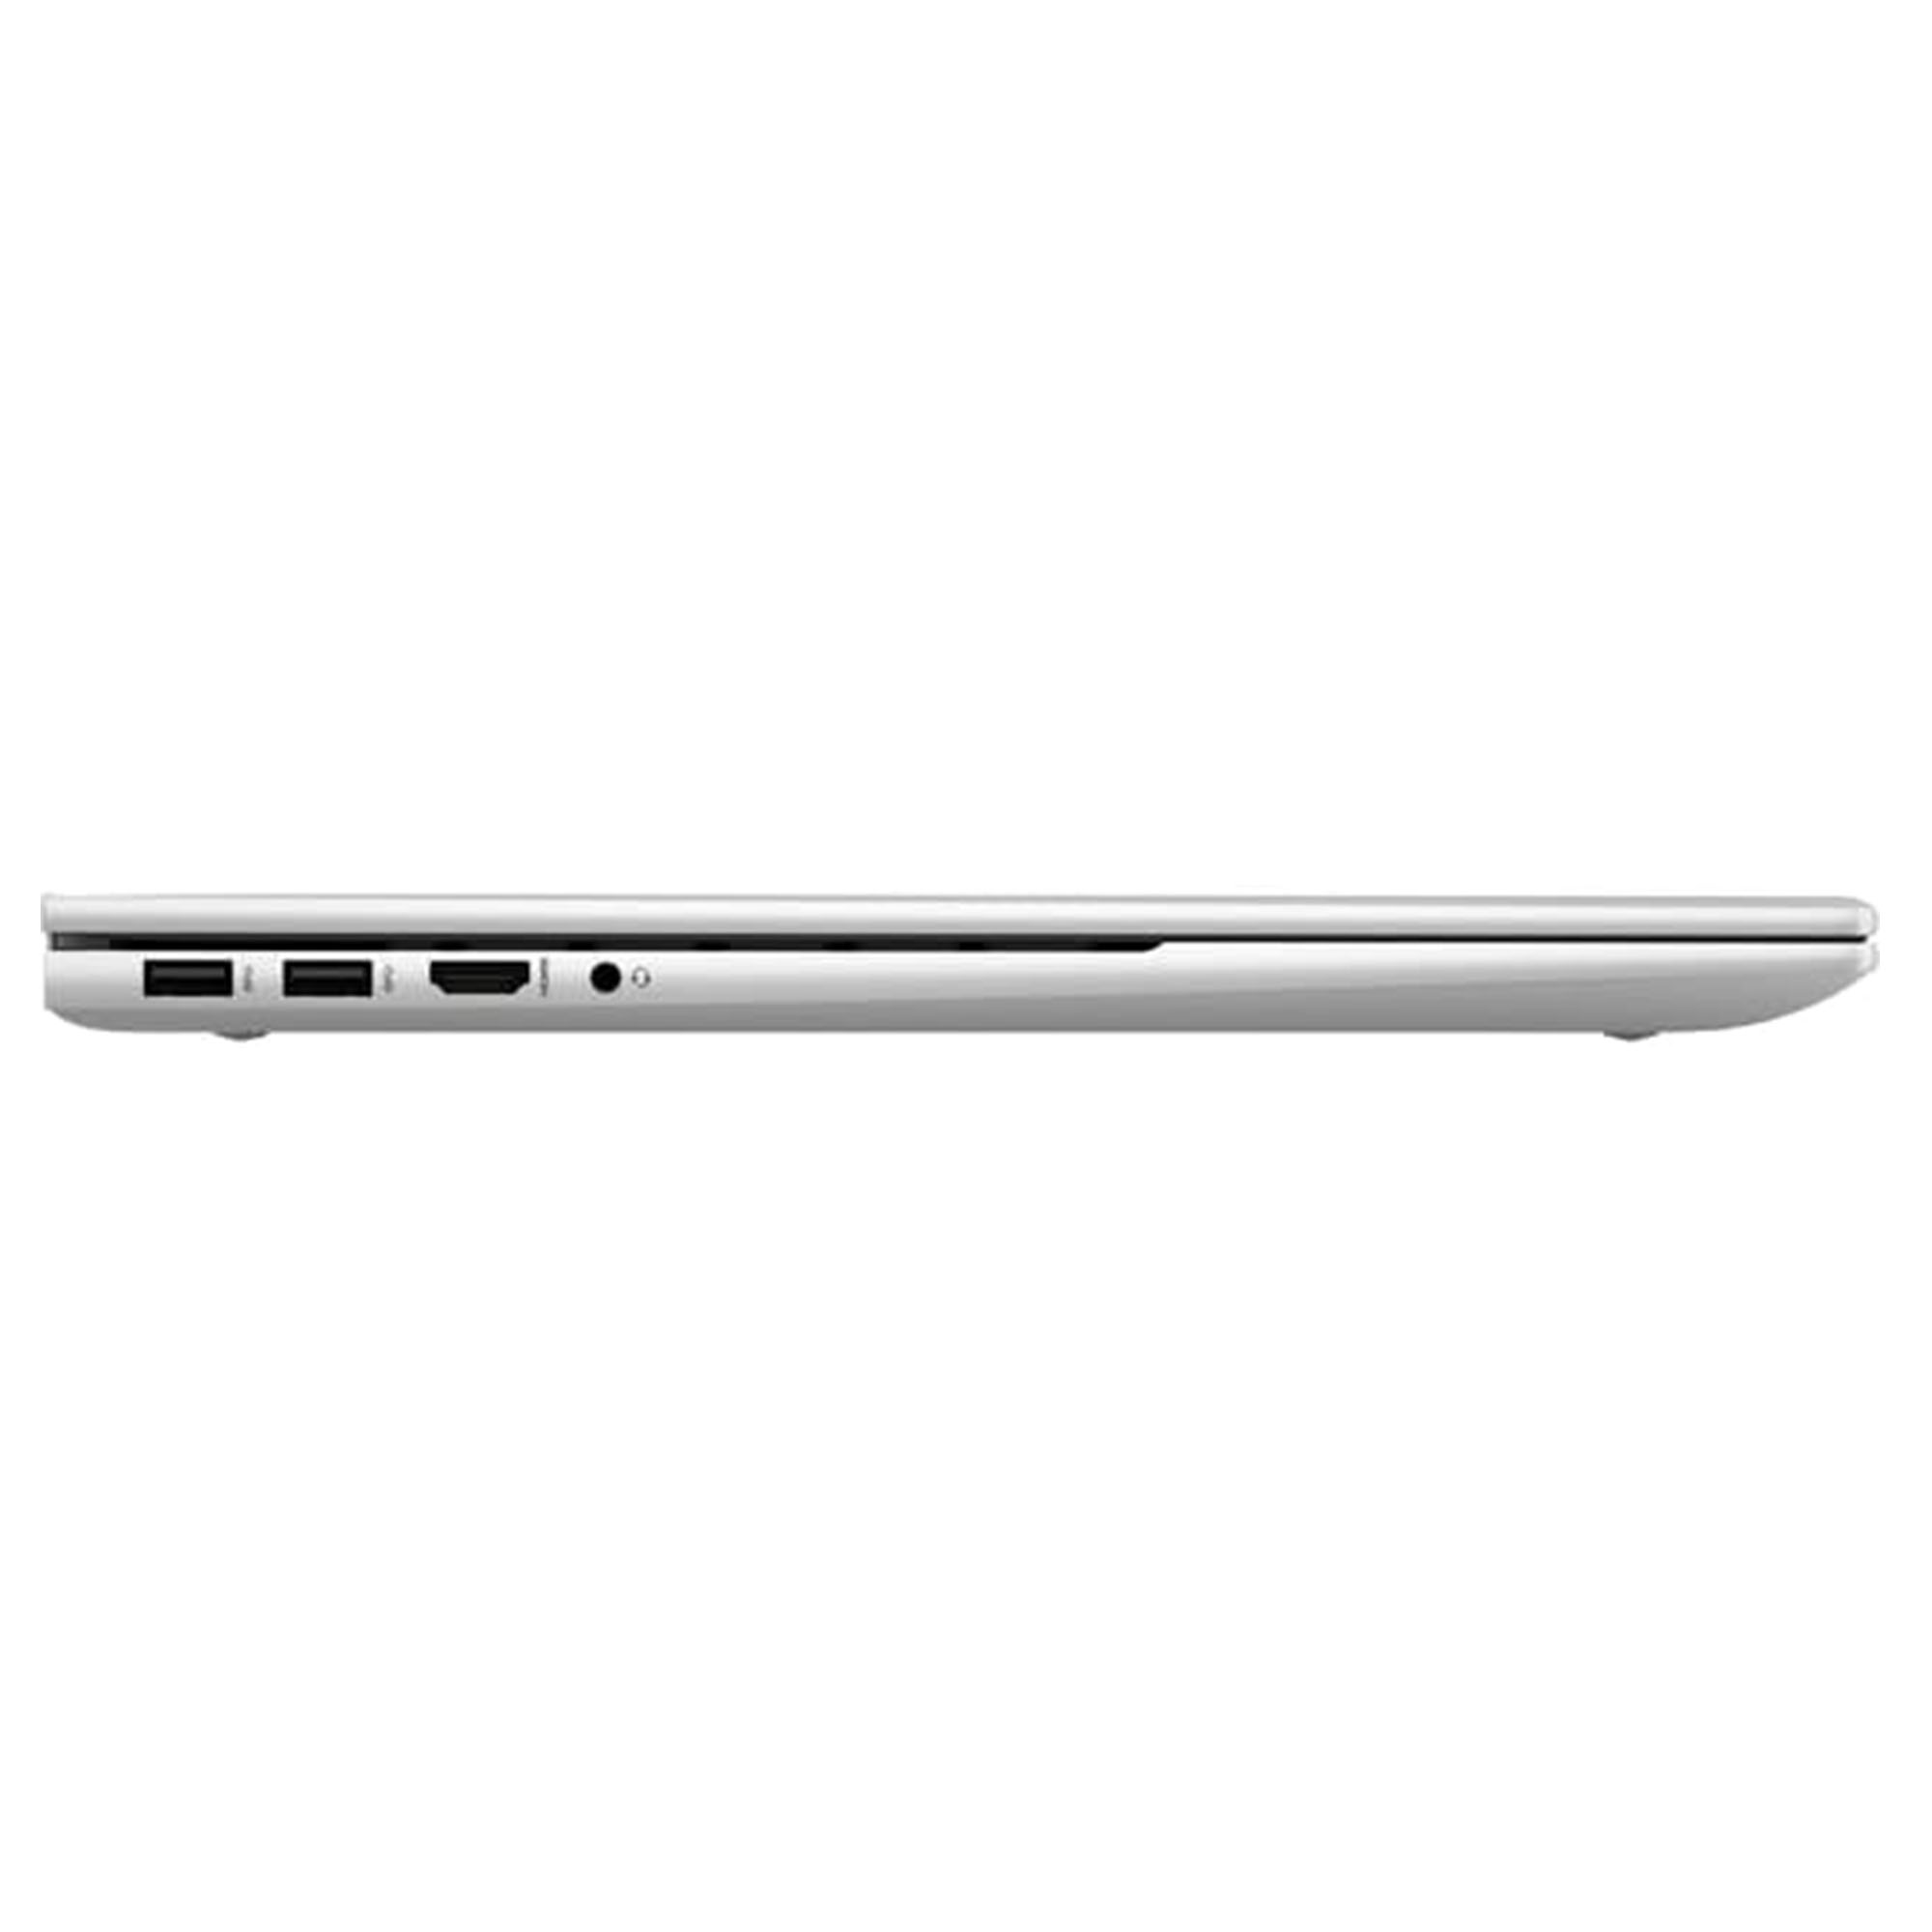 HP Envy 17 17.3" FHD Touchscreen [Windows 11 Pro] Business Laptop, Intel 12-Core i7-1260P, 32GB DDRR4 RAM, 2TB PCIe SSD, Iris Xe Graphic, Backlit KB, Wi-Fi6, Bluetooth 5.3, w/Office Accessories - image 5 of 6